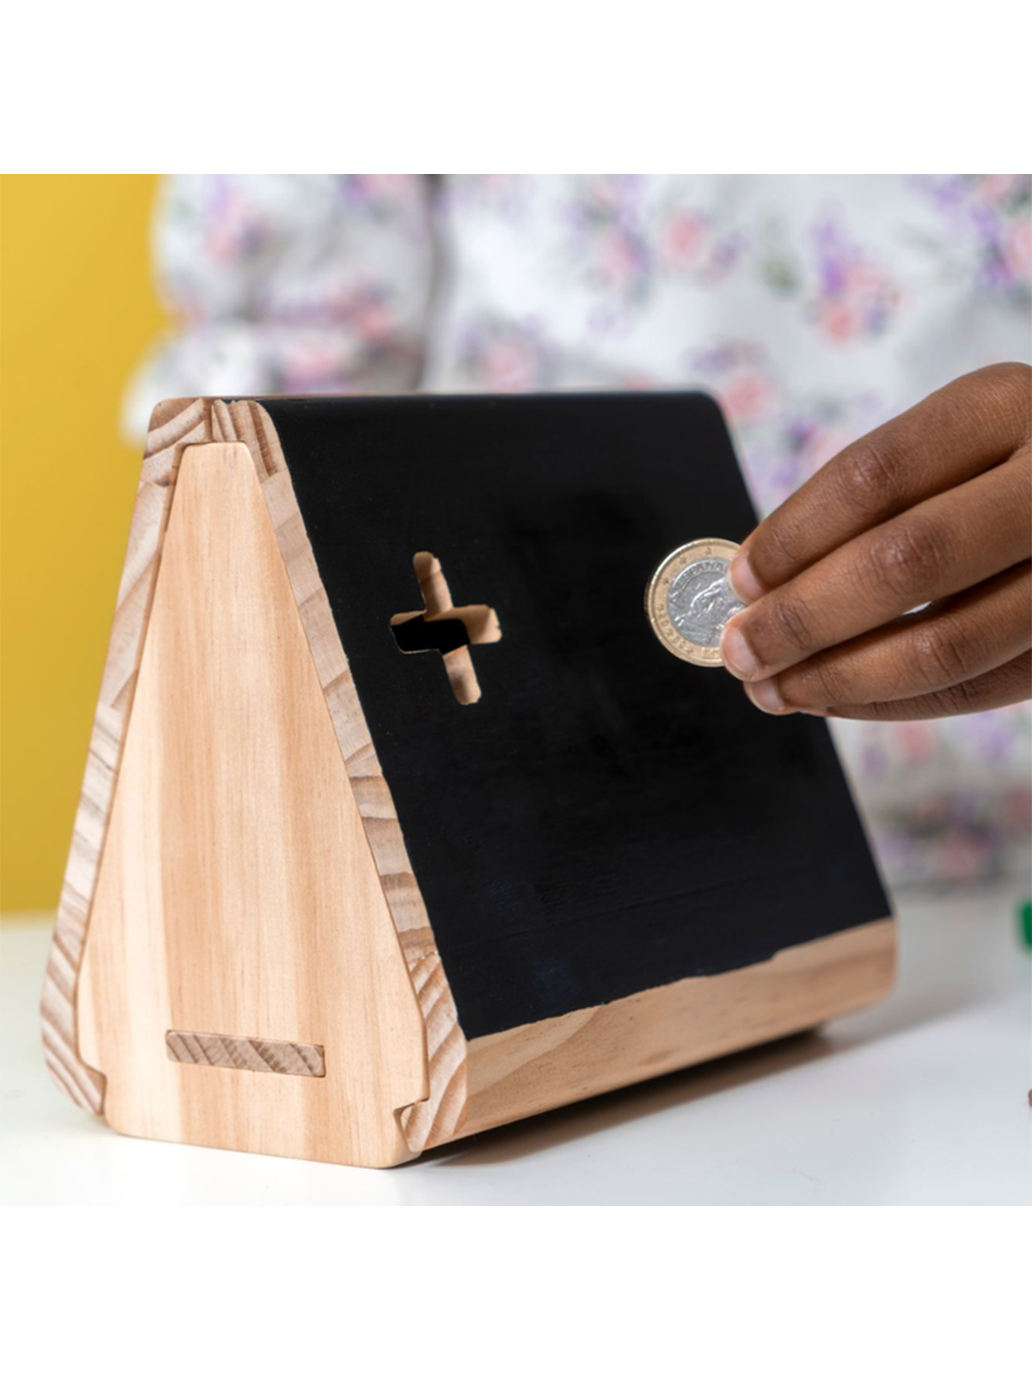 STEM toy create your own piggy bank